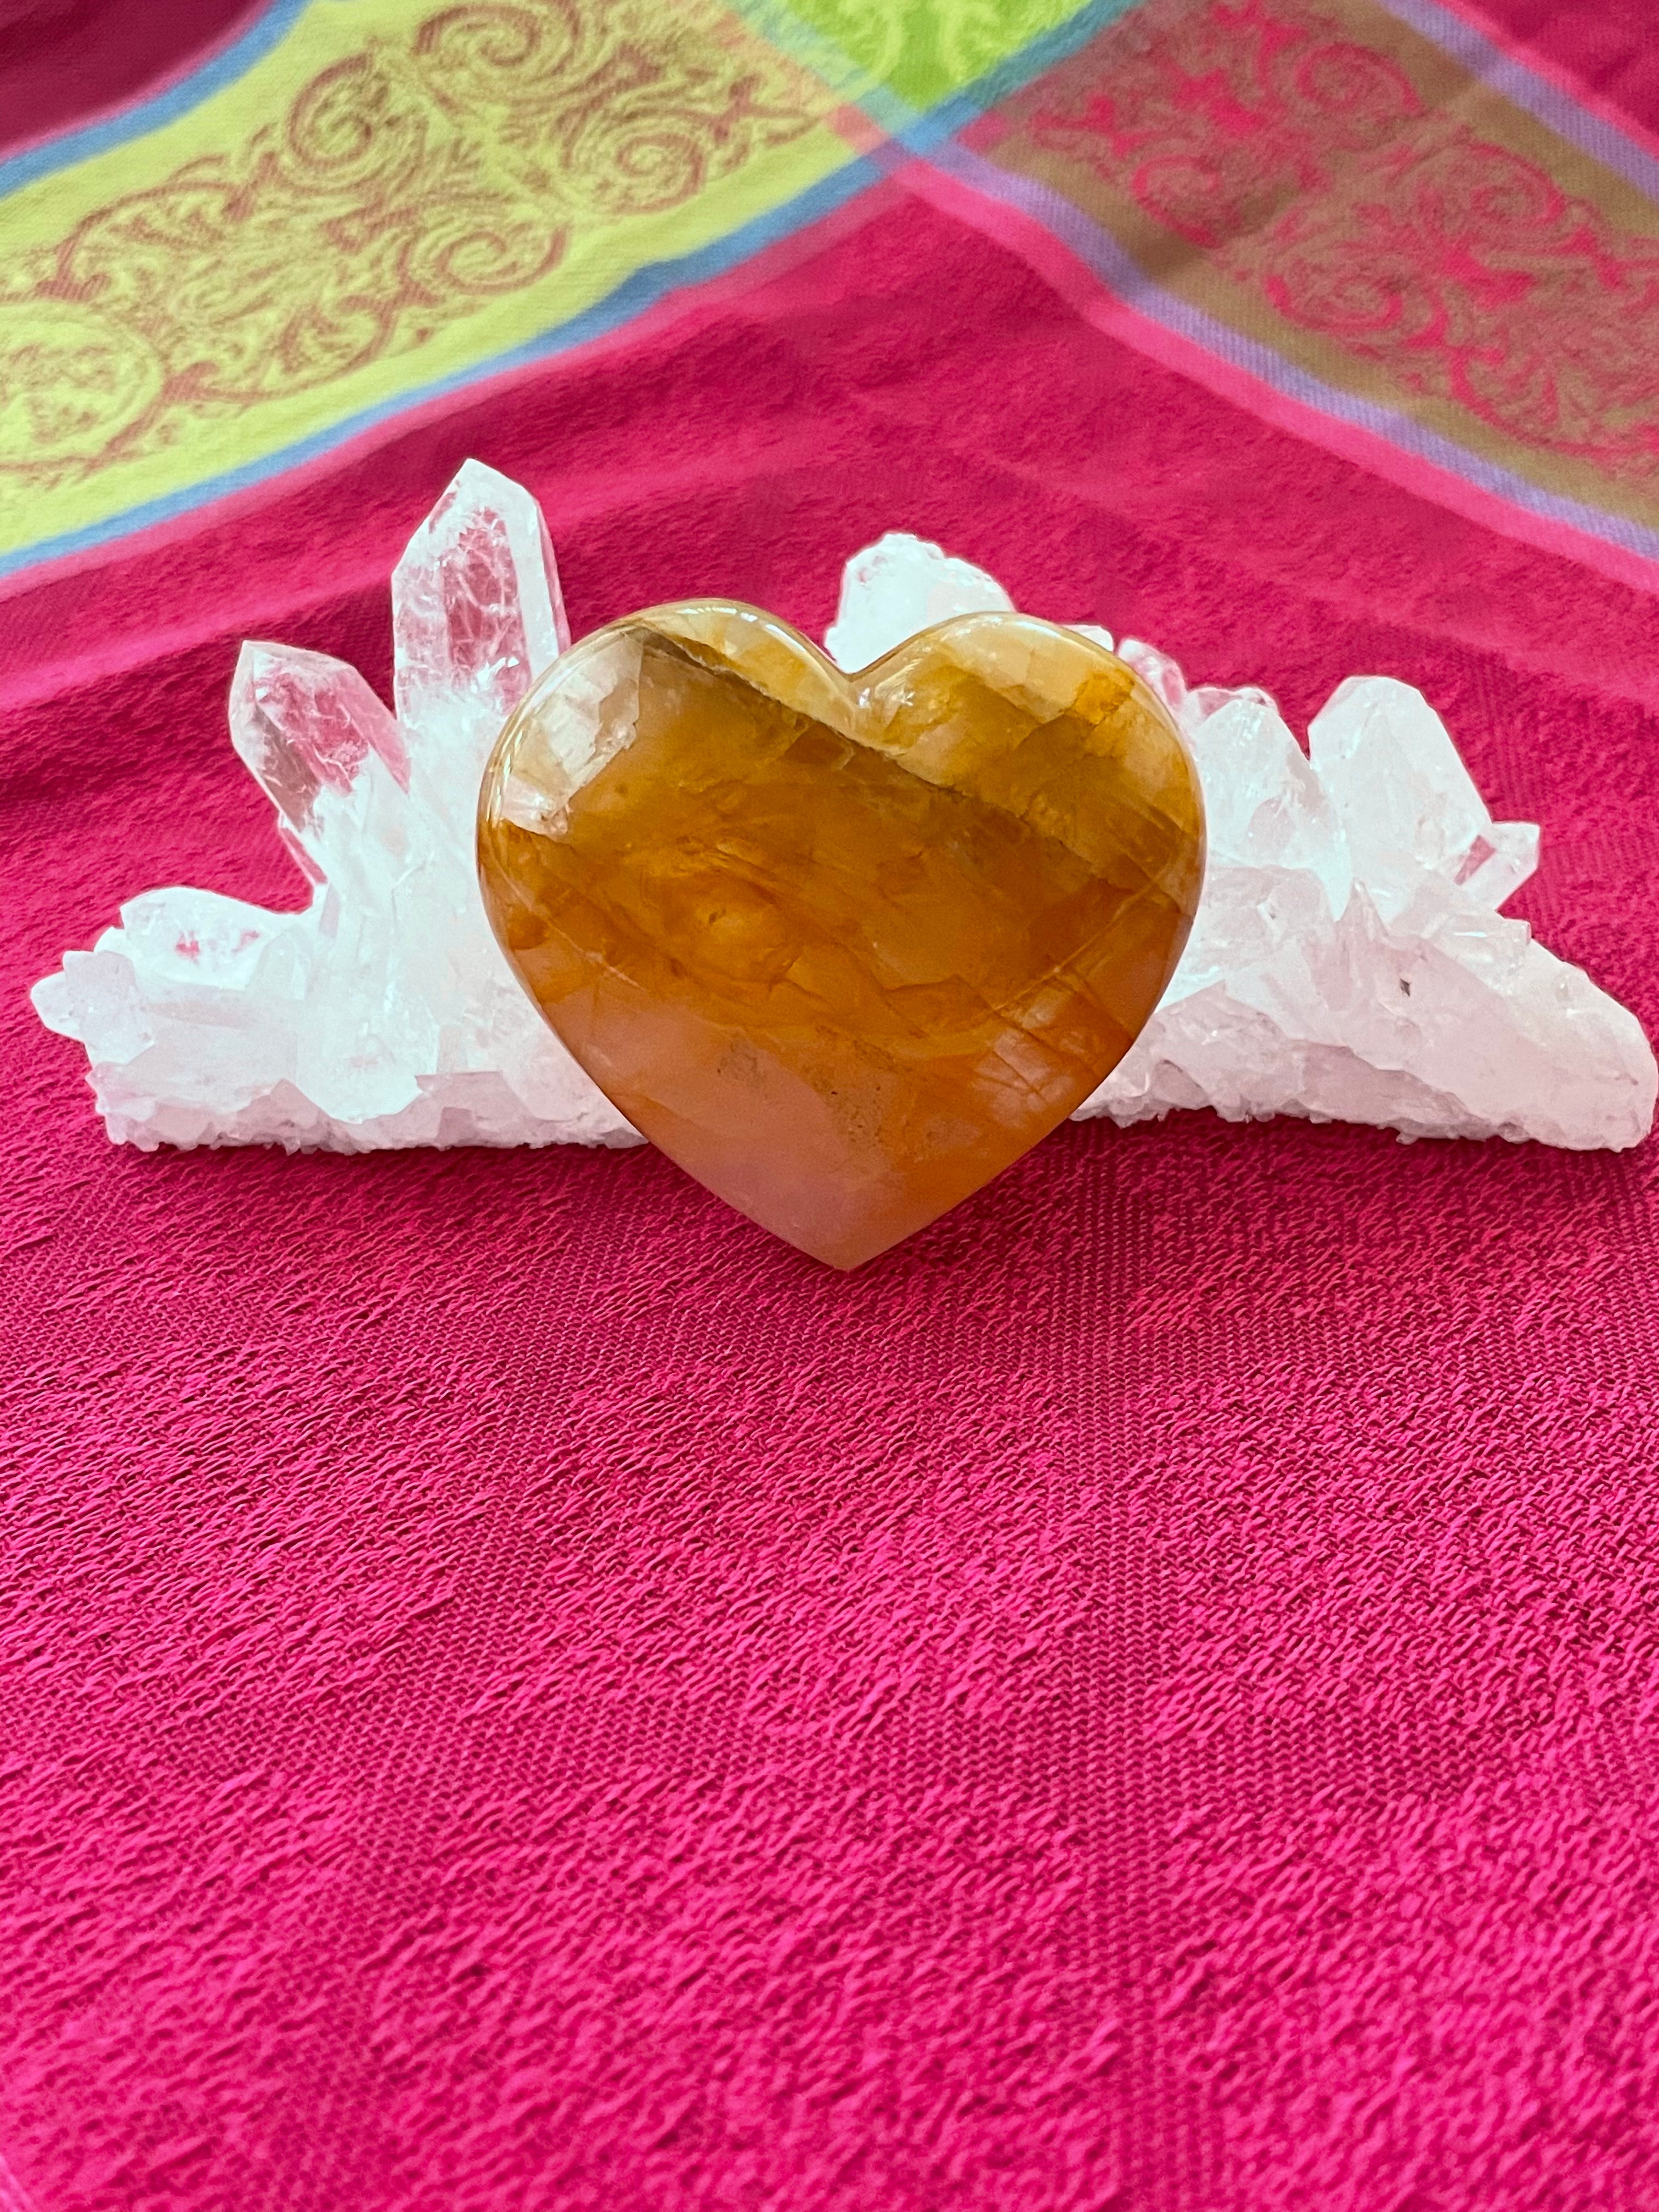 Reverse side. Beautiful citrine heart! Great to place on your altar or bookshelf, to hold during meditation, to use for healing or as a décor item in your home of office. Citrine absorbs and dispels negative energy, is a stone of abundance - attracting money, prosperity and success, is warming & energizing, enhances creativity, brings a positive attitude, is cleansing and more. This citrine heart is approximately 2" at it's widest expanse. Cost $22.